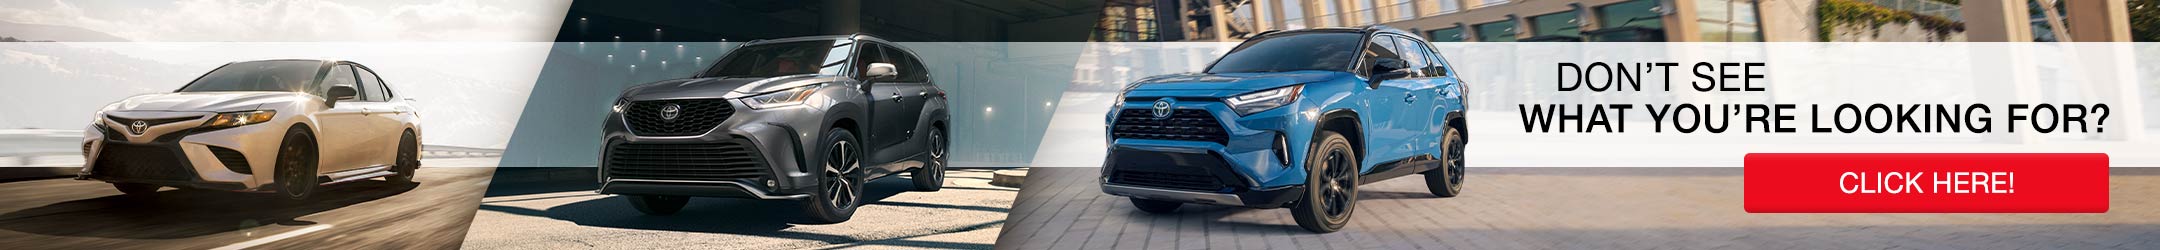 Downtown Toyota | Let us find your vehicle